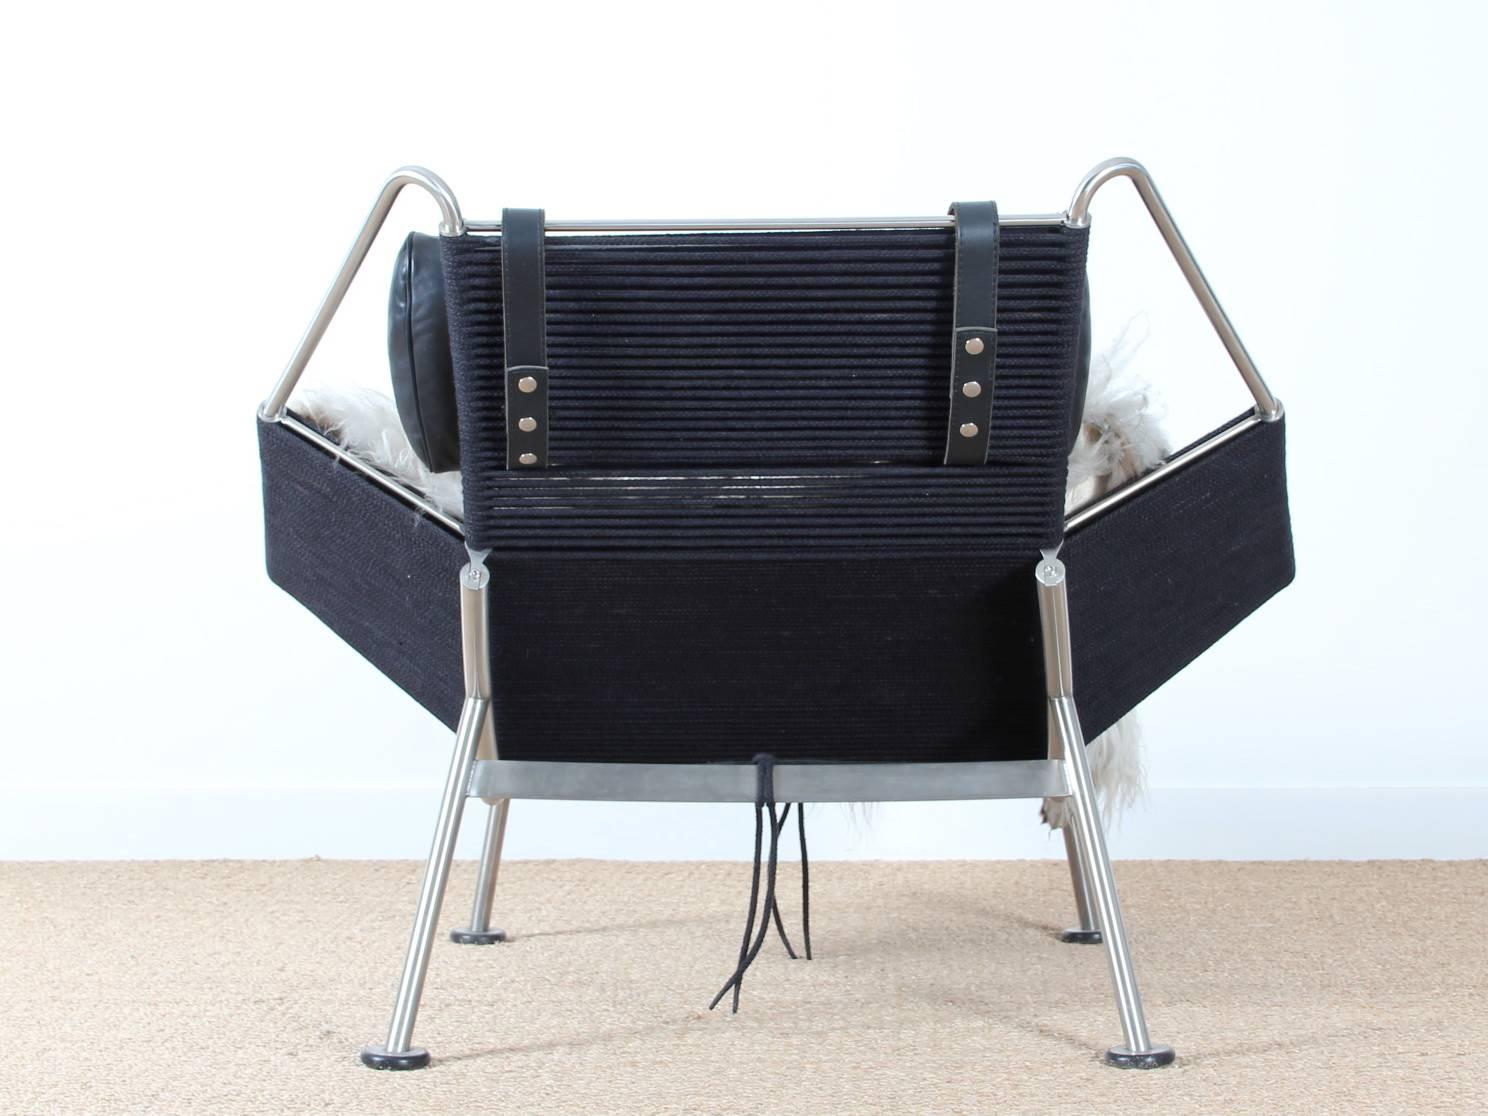 Flag Halyard chair lounge chair PP 225 new edition.

The Flag Halyard Hans Wegner is a tribute to the modernist Le Corbusier, Mies Van Der Rohe and Marcel Breuer. Wegner seeks in turn to control steel. Hans Wegner designed the shape of the seat